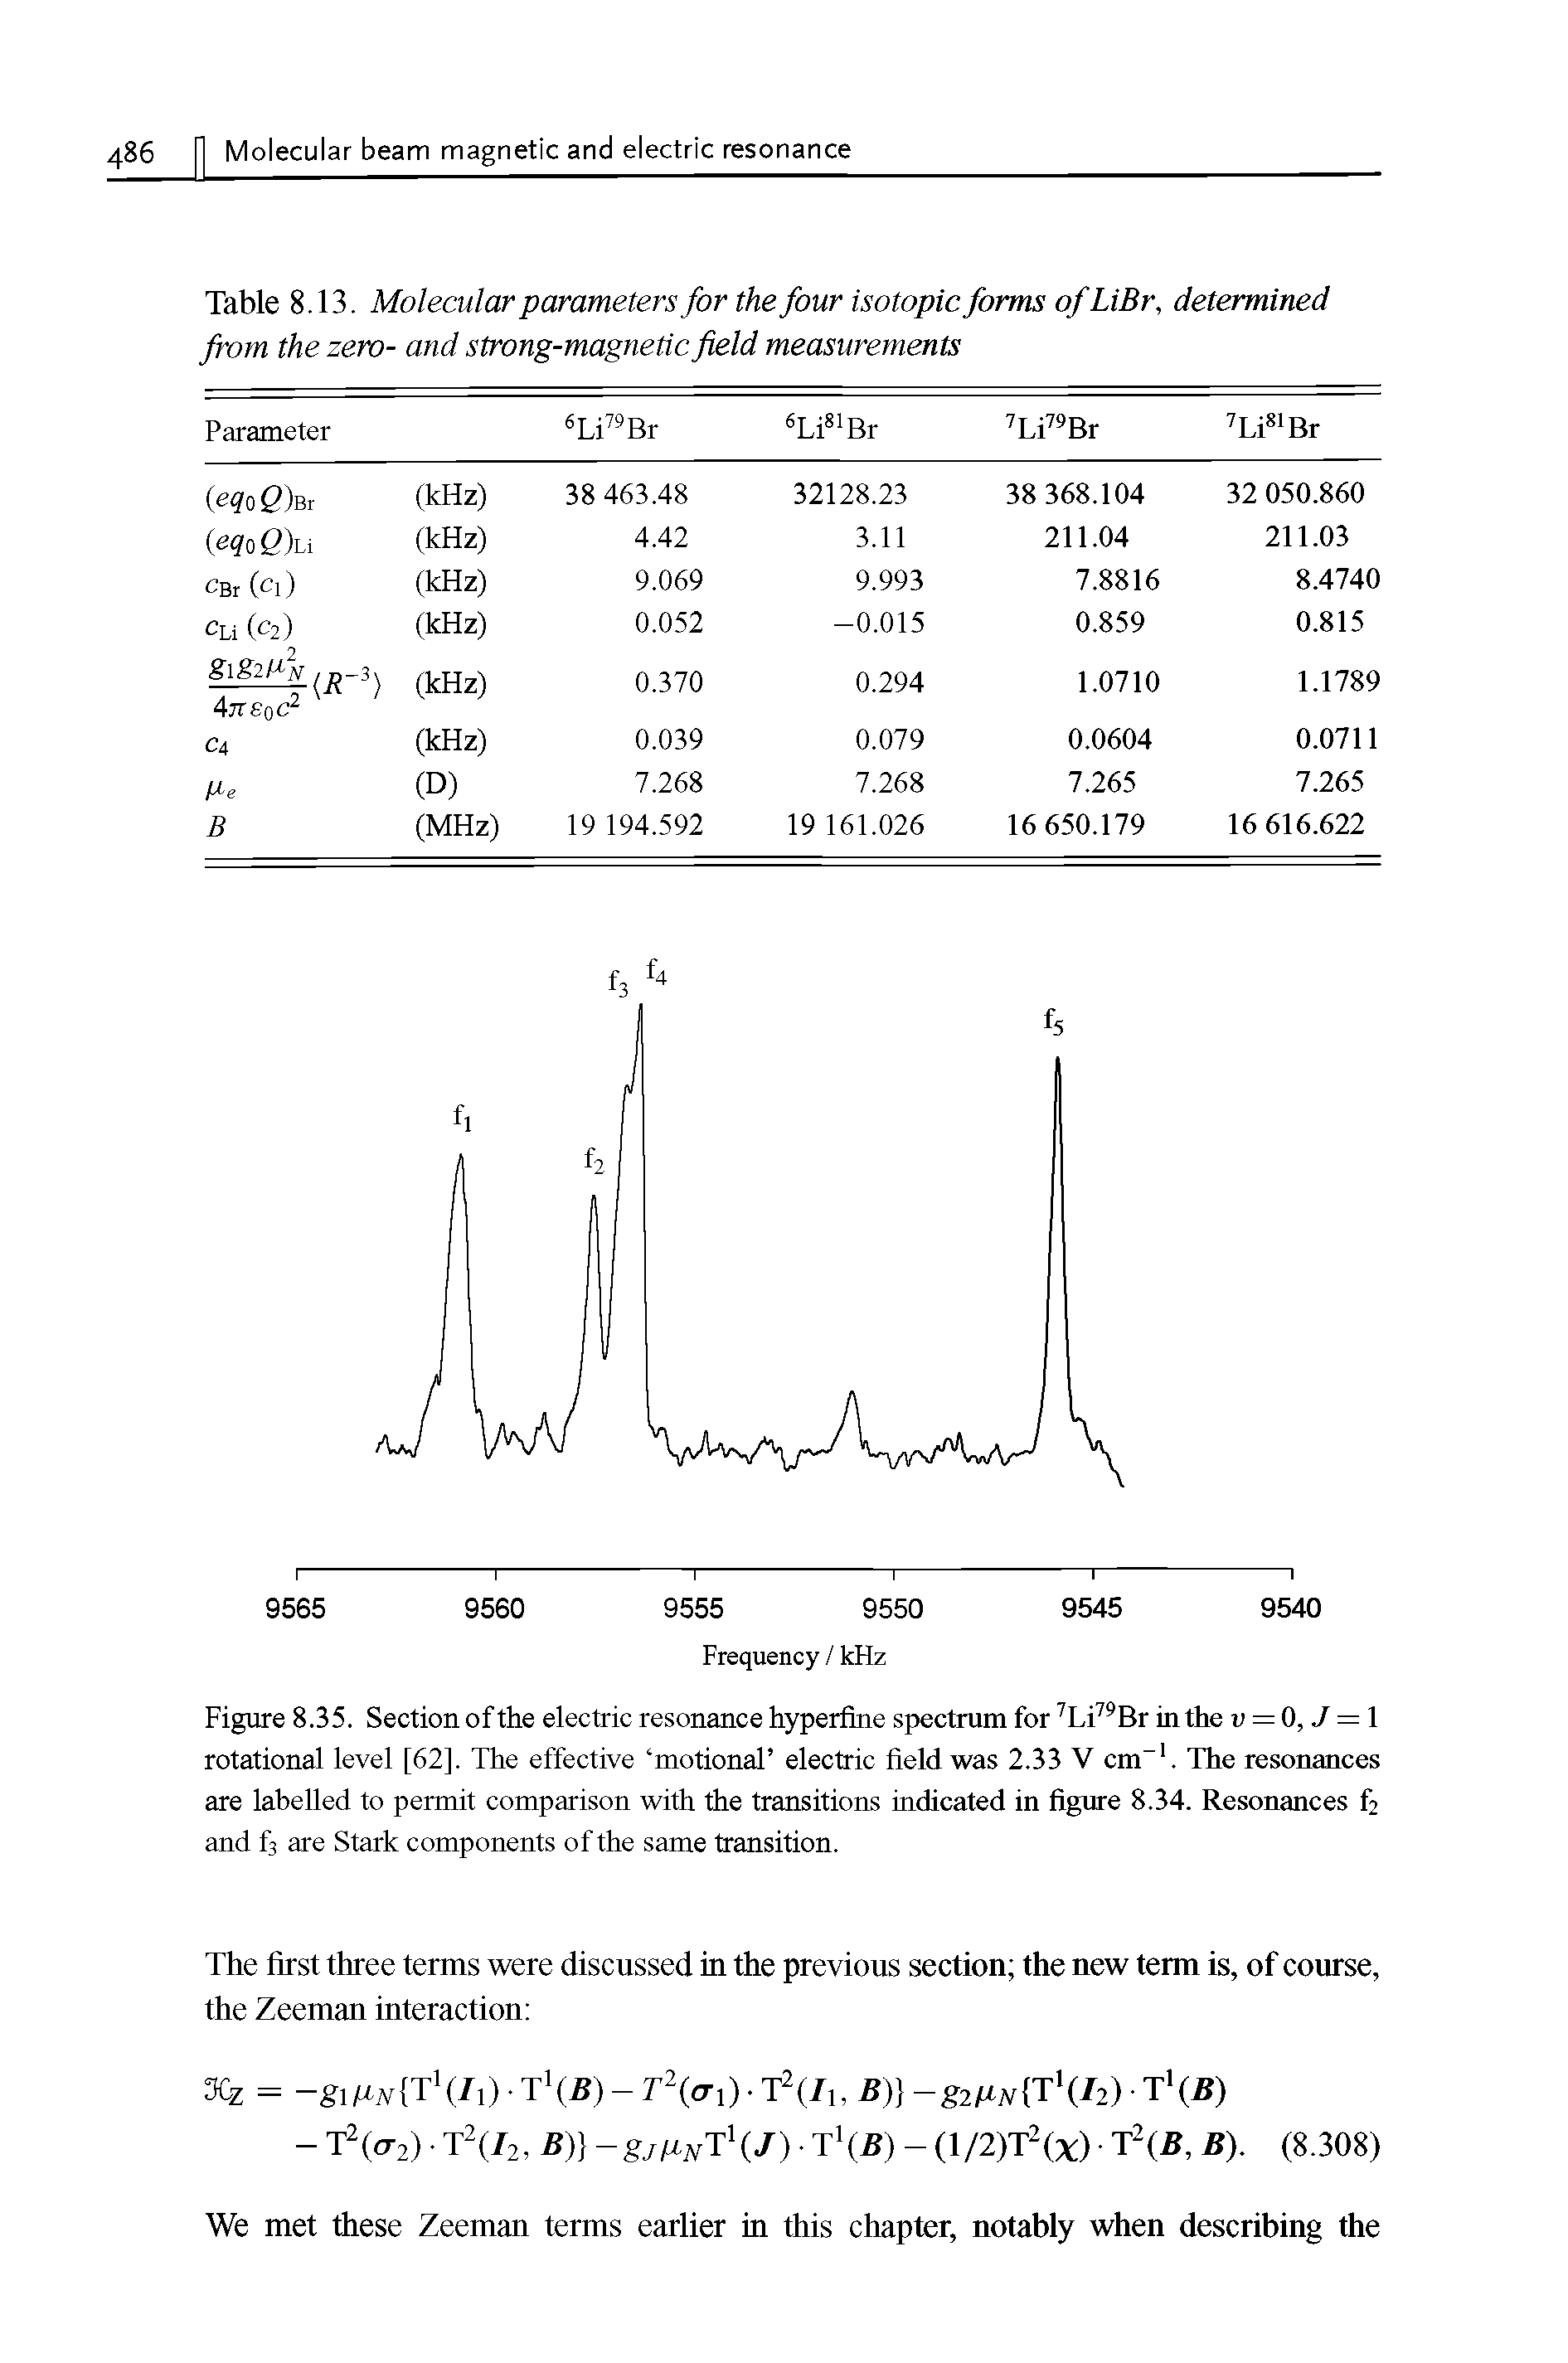 Table 8.13. Molecular parameters for the four isotopic forms ofLiBr, determined from the zero- and strong-magnetic field measurements...